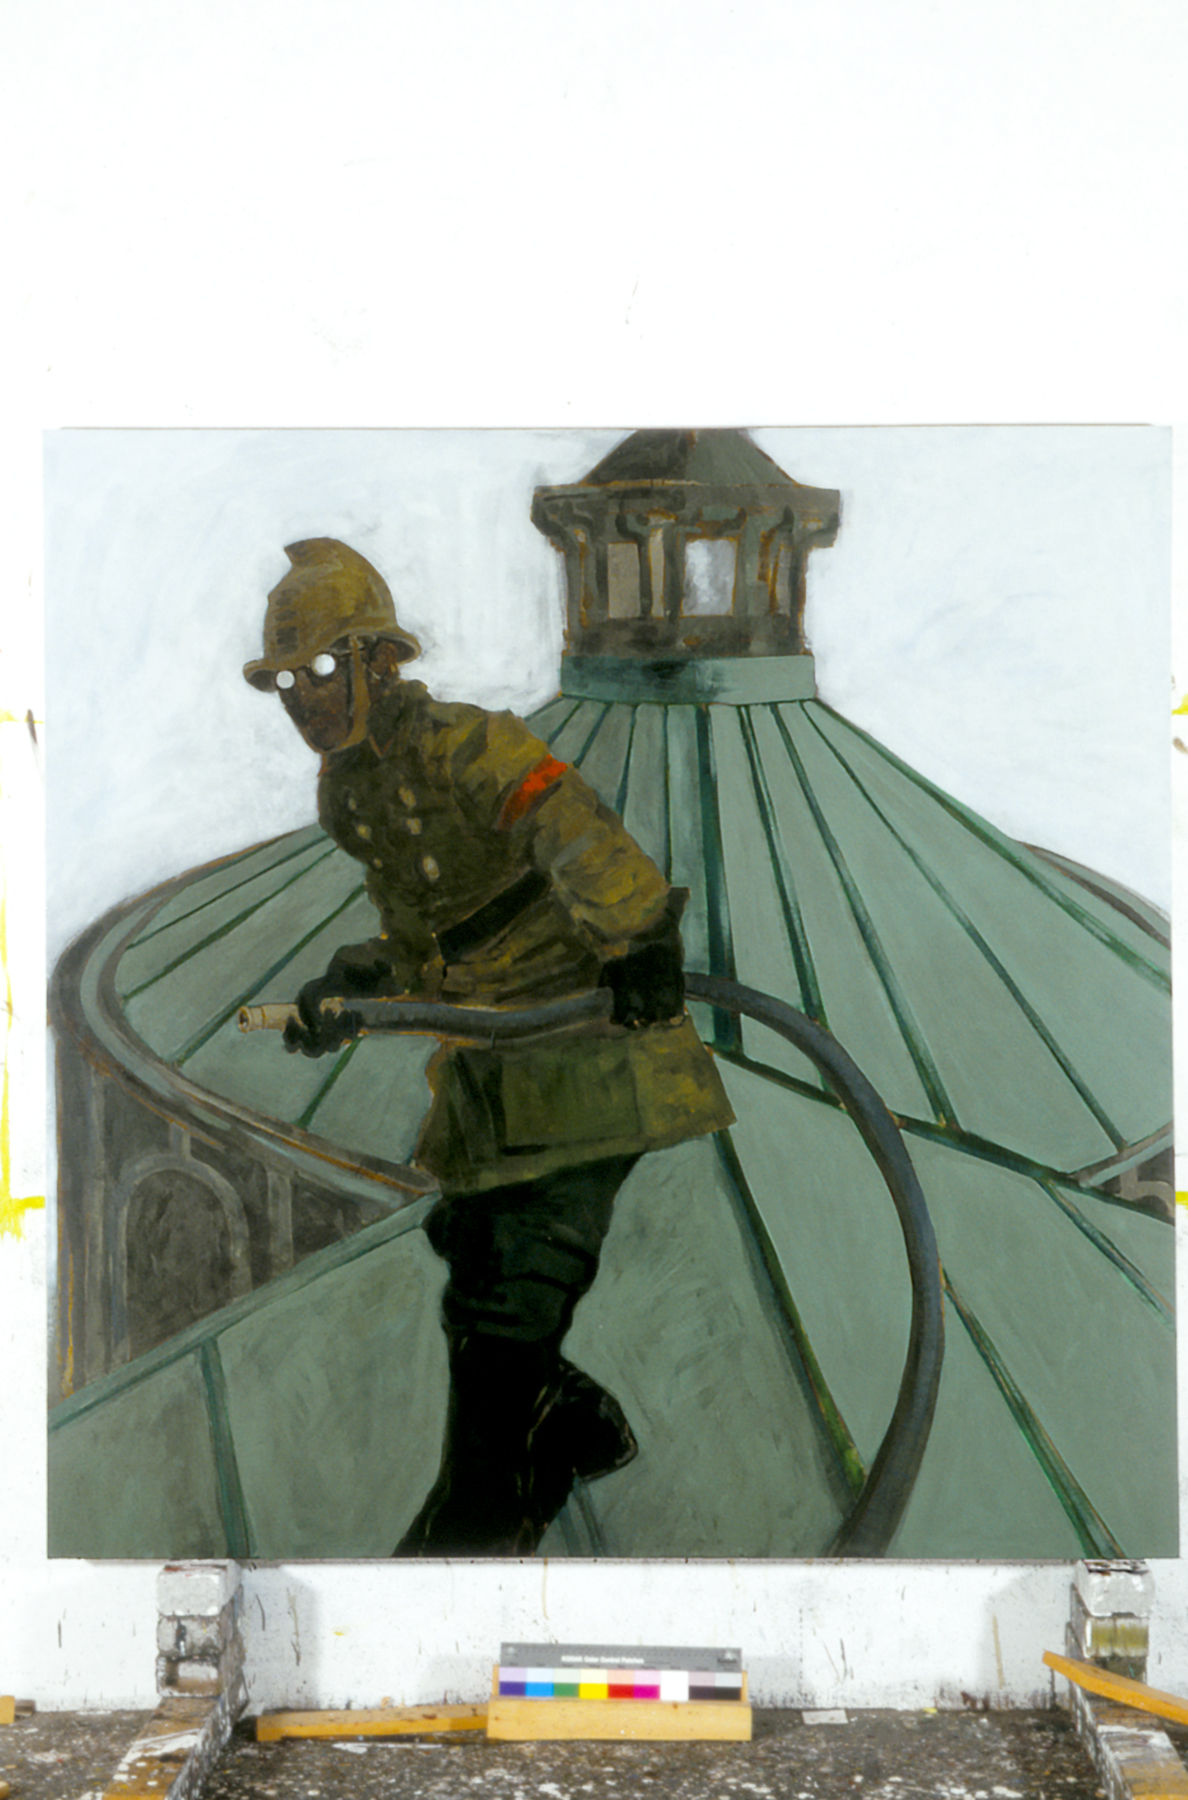 Shostakovitch, dressed as a fireman, on the roof of the Leningrad Conservatoire, 1941